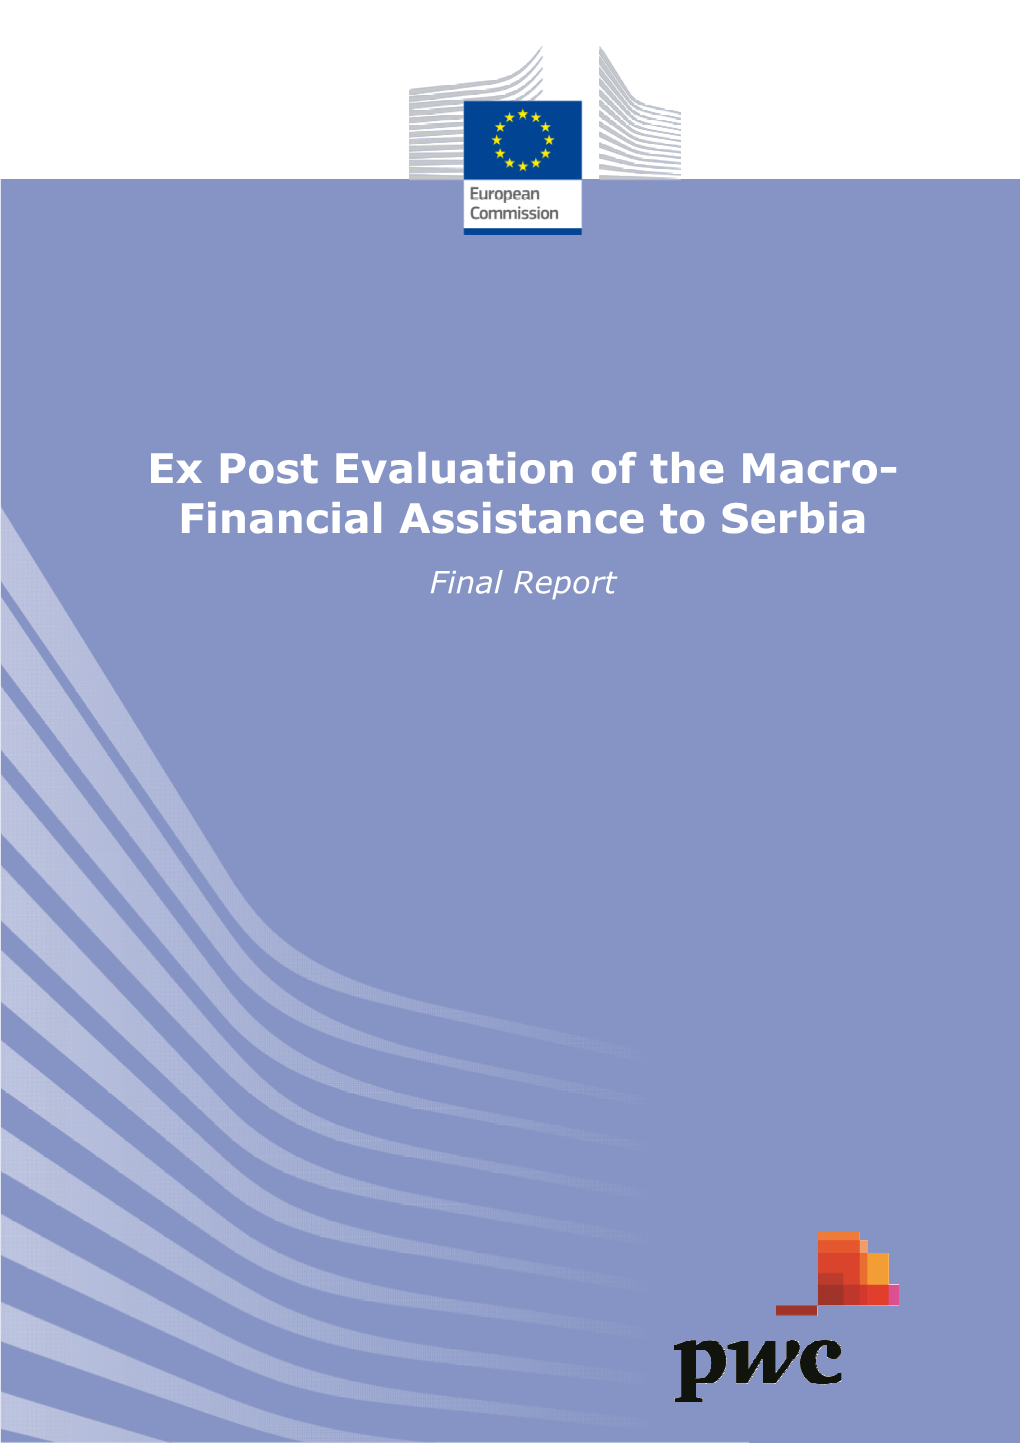 Financial Assistance to Serbia Final Report Ex Post Evaluation of the Macro-Financial Assistance to Serbia